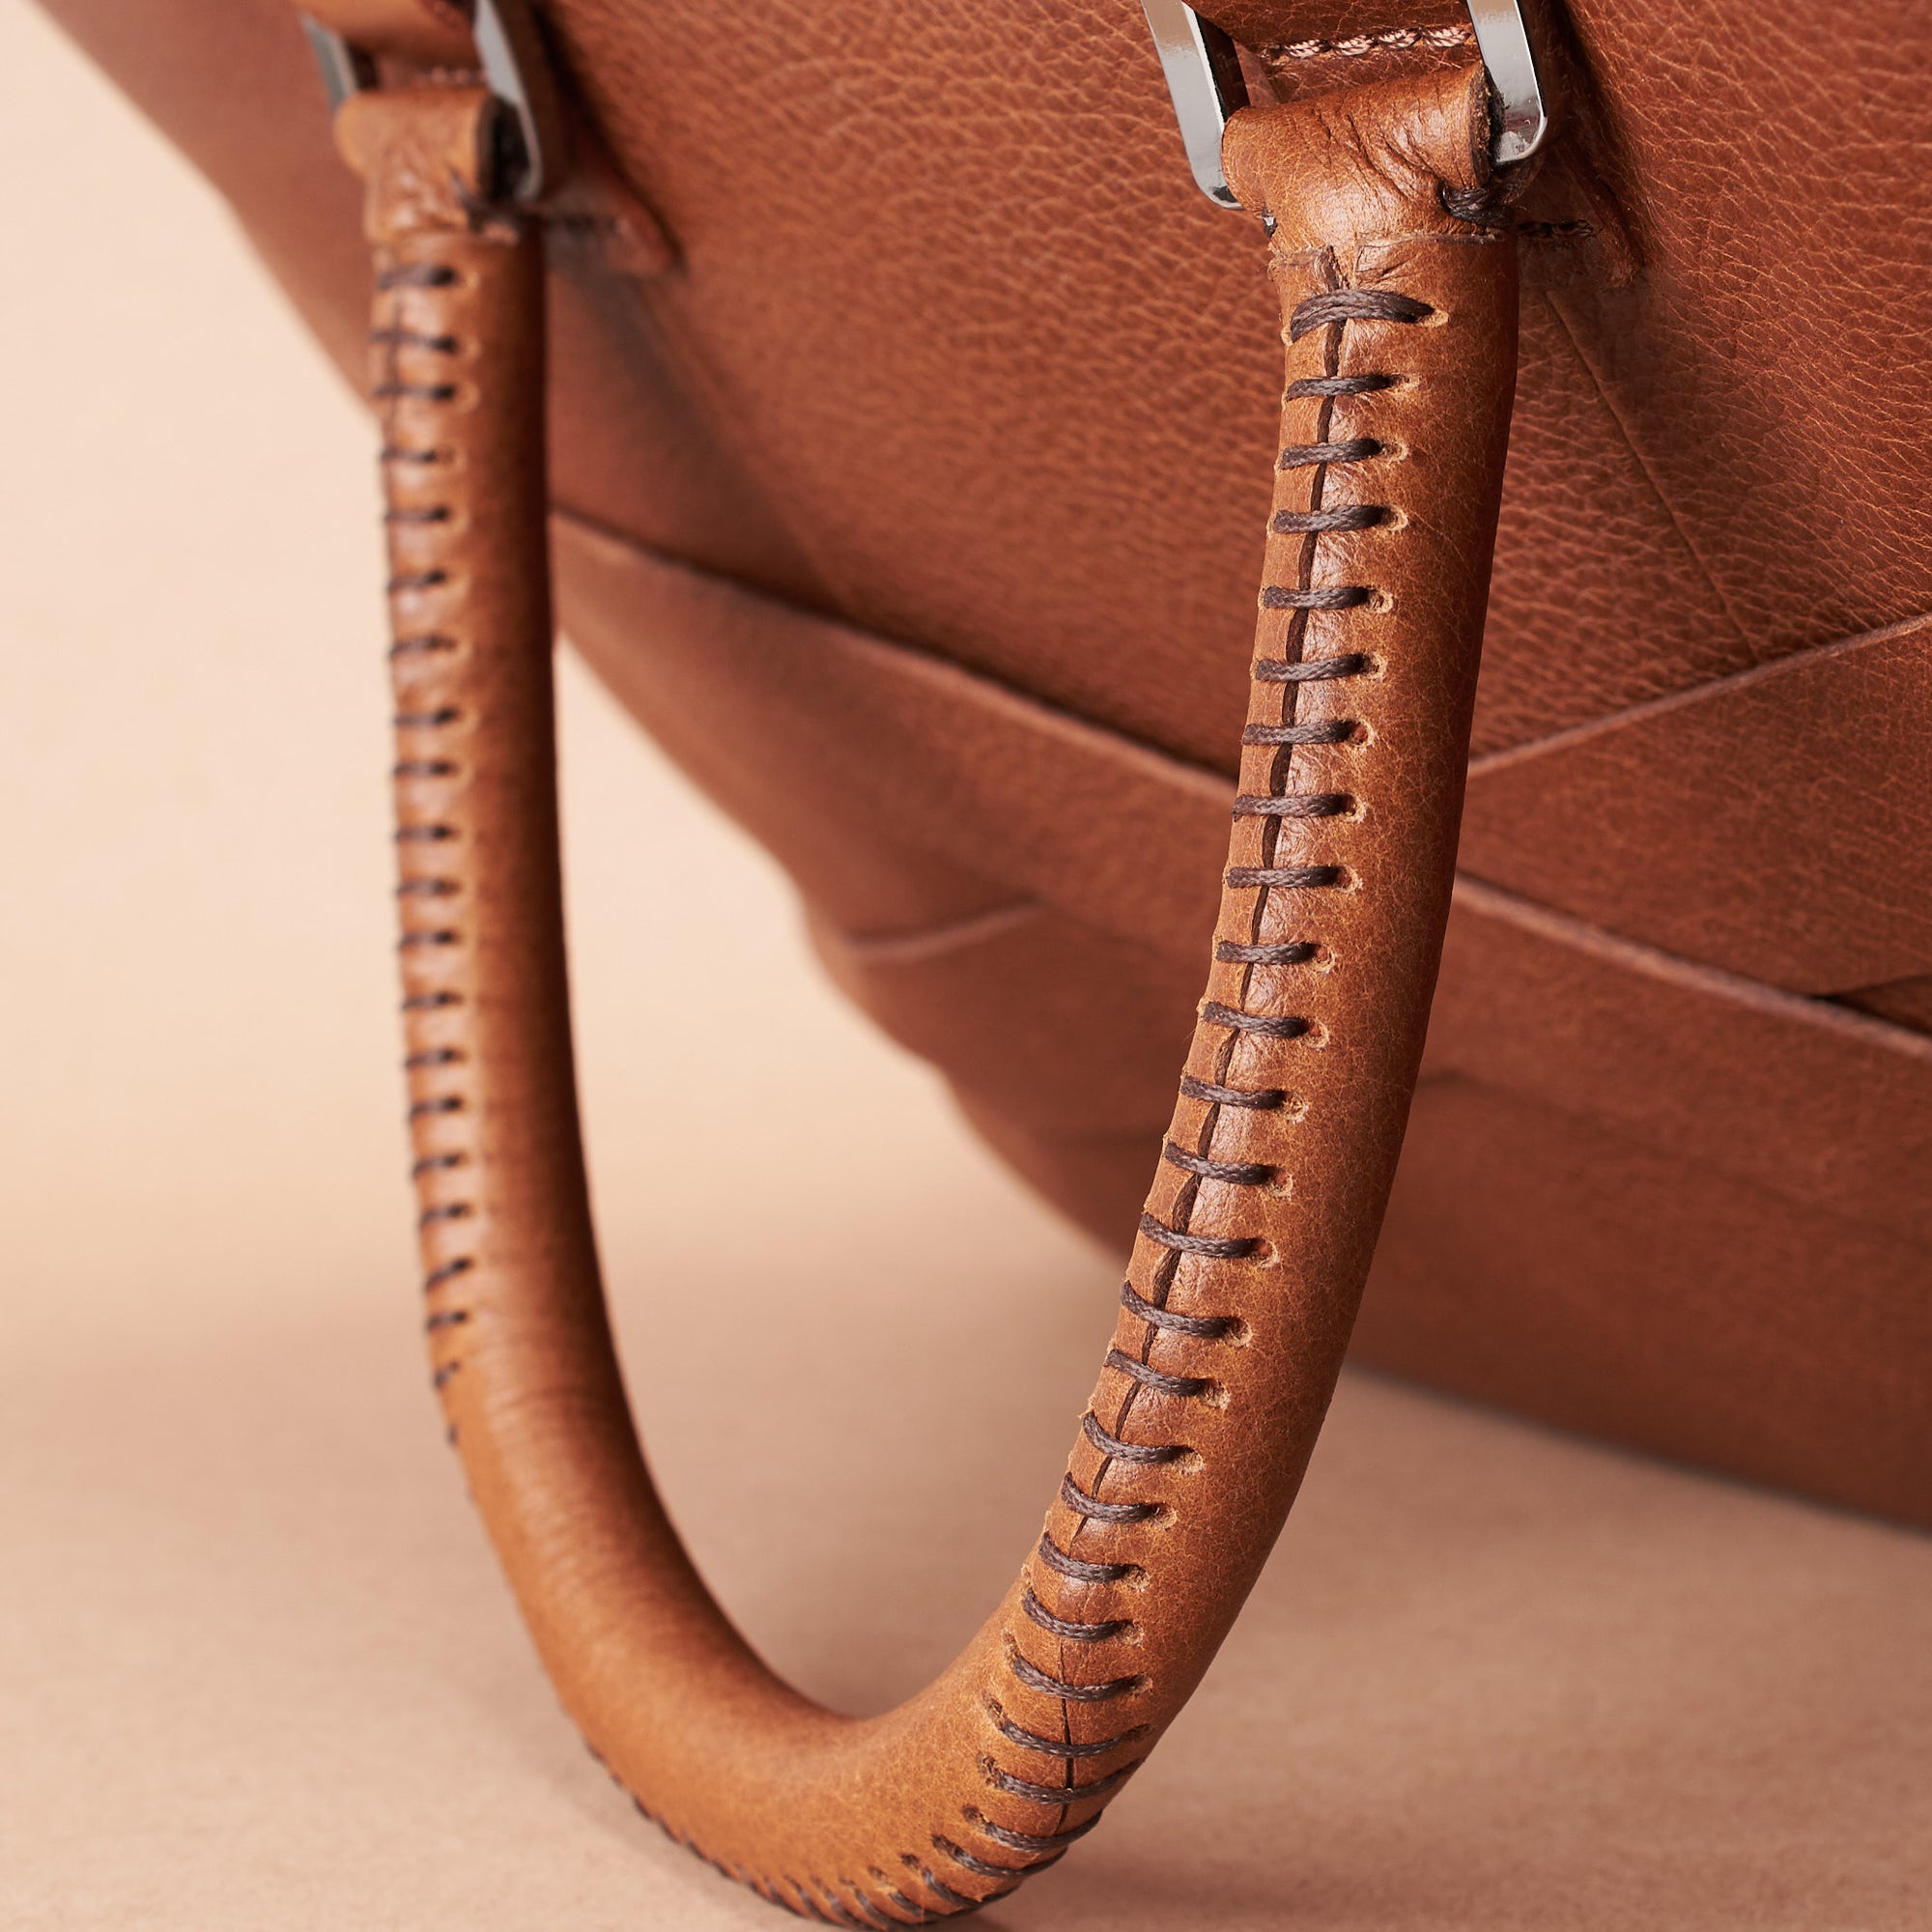 Hand stitch cylindrical handle detail. Tan leather briefcase laptop bag for men. Gazeli laptop briefcase by Capra Leather.